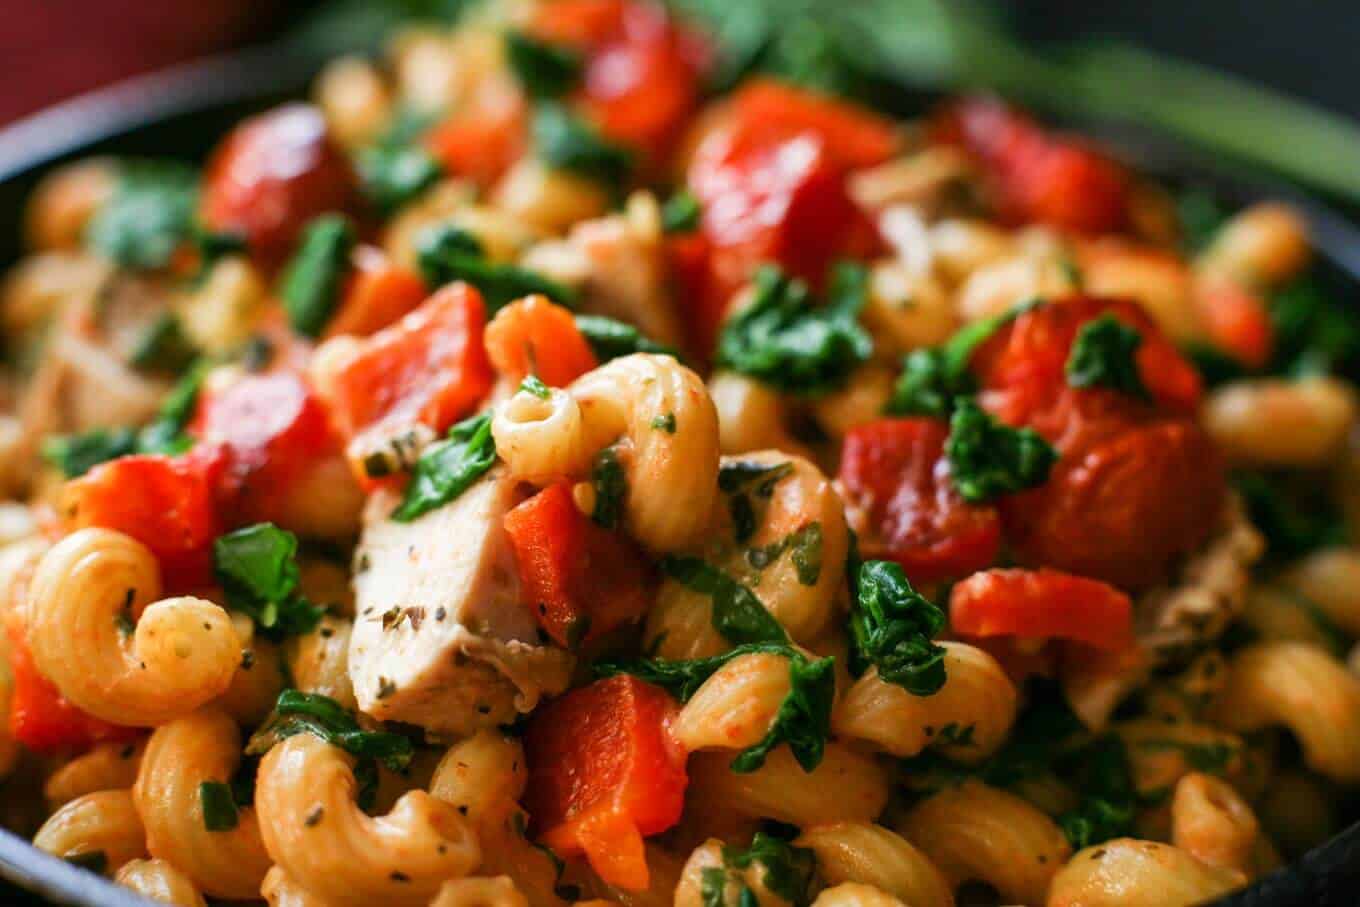 tomato mascarpone pasta with chicken and red peppers